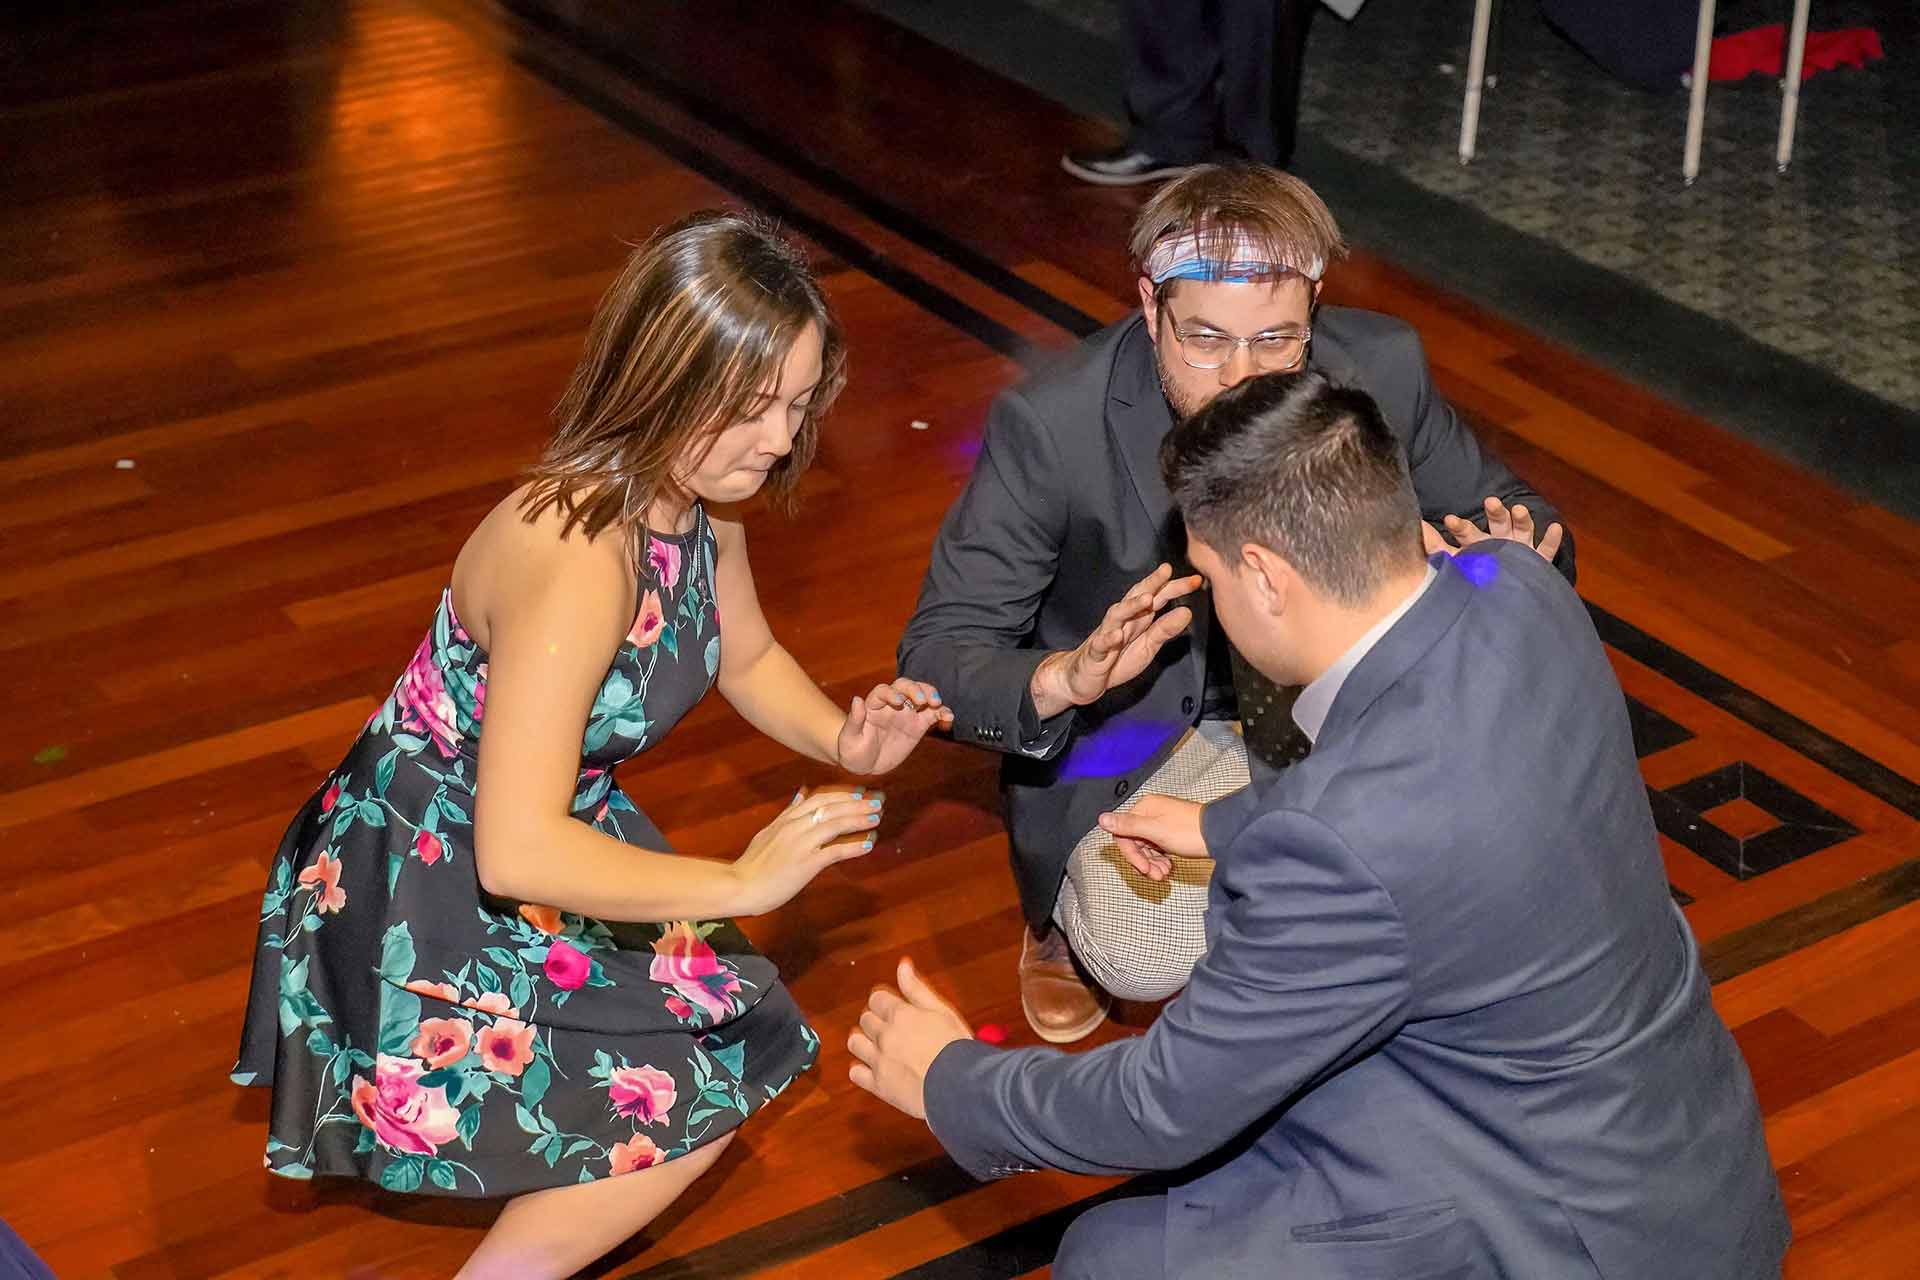 father-daughter-dance-2019-three-people-crouching-on-the-dance-floor